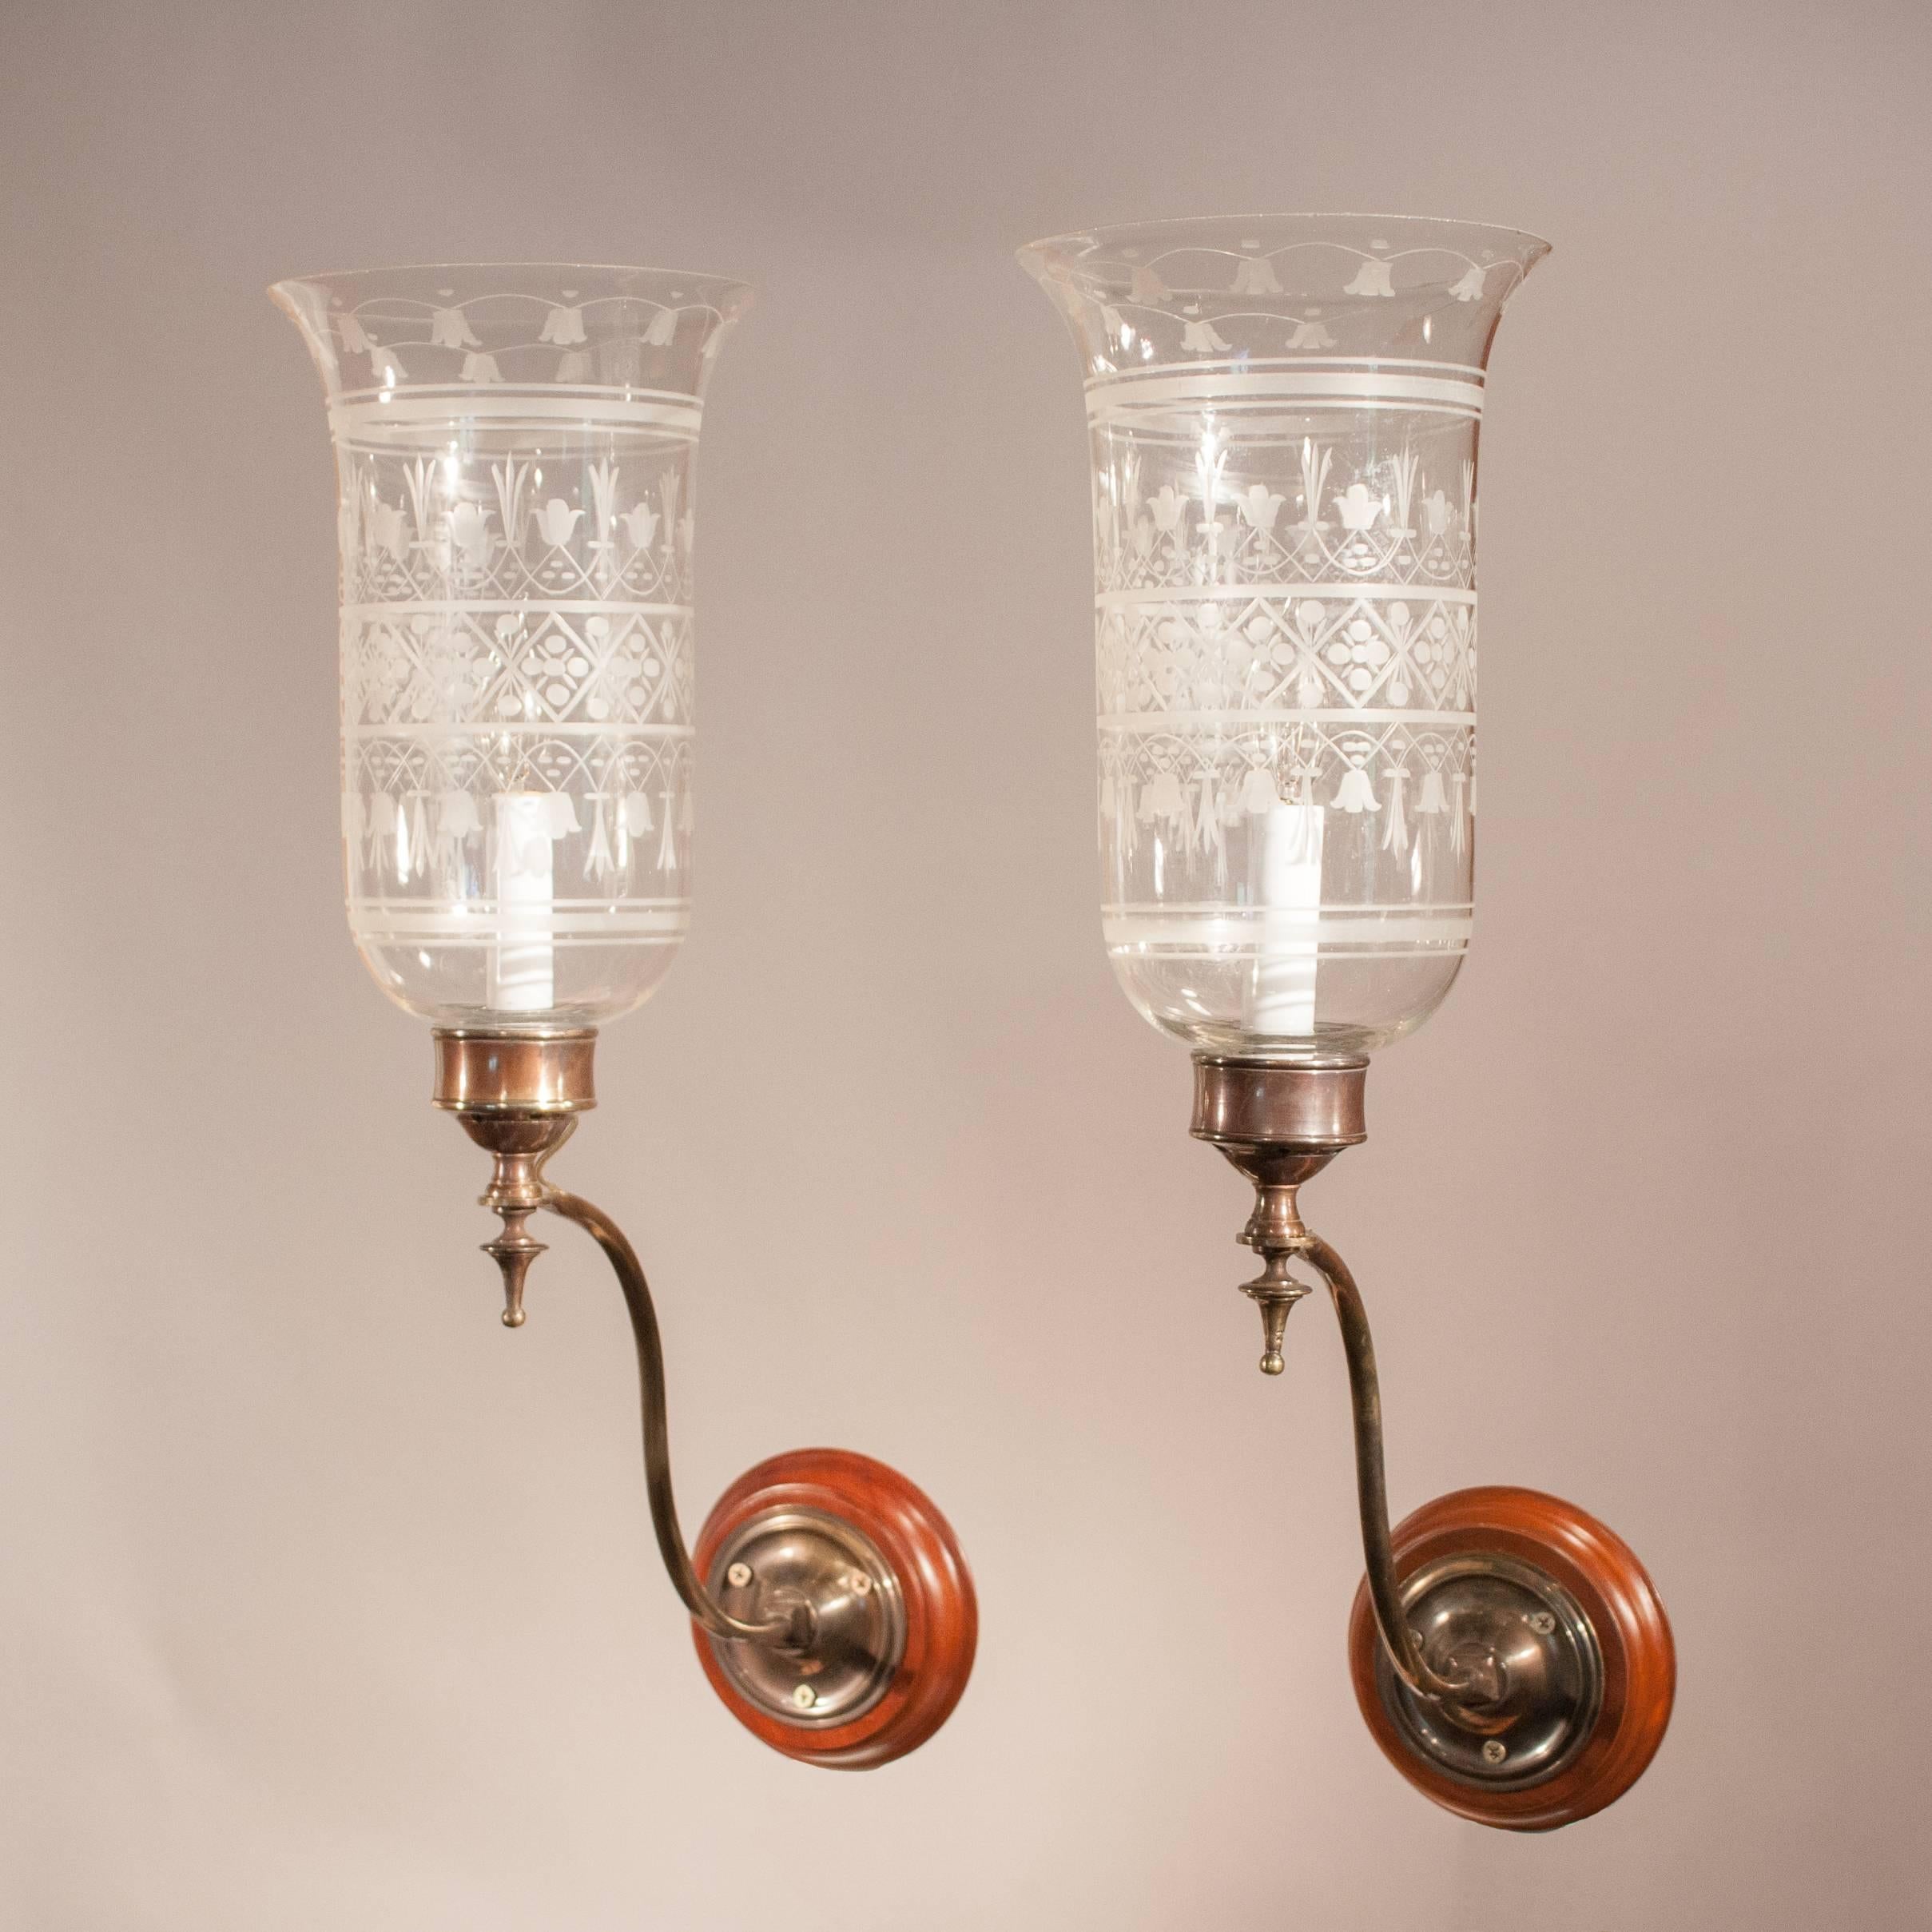 Lovely pair of antique English handblown glass hurricane sconce shades with a graceful flair at top and full-form, acid etched floral design. Originally for candles, these 1920s wall sconces are newly electrified and take a single candelabra bulb